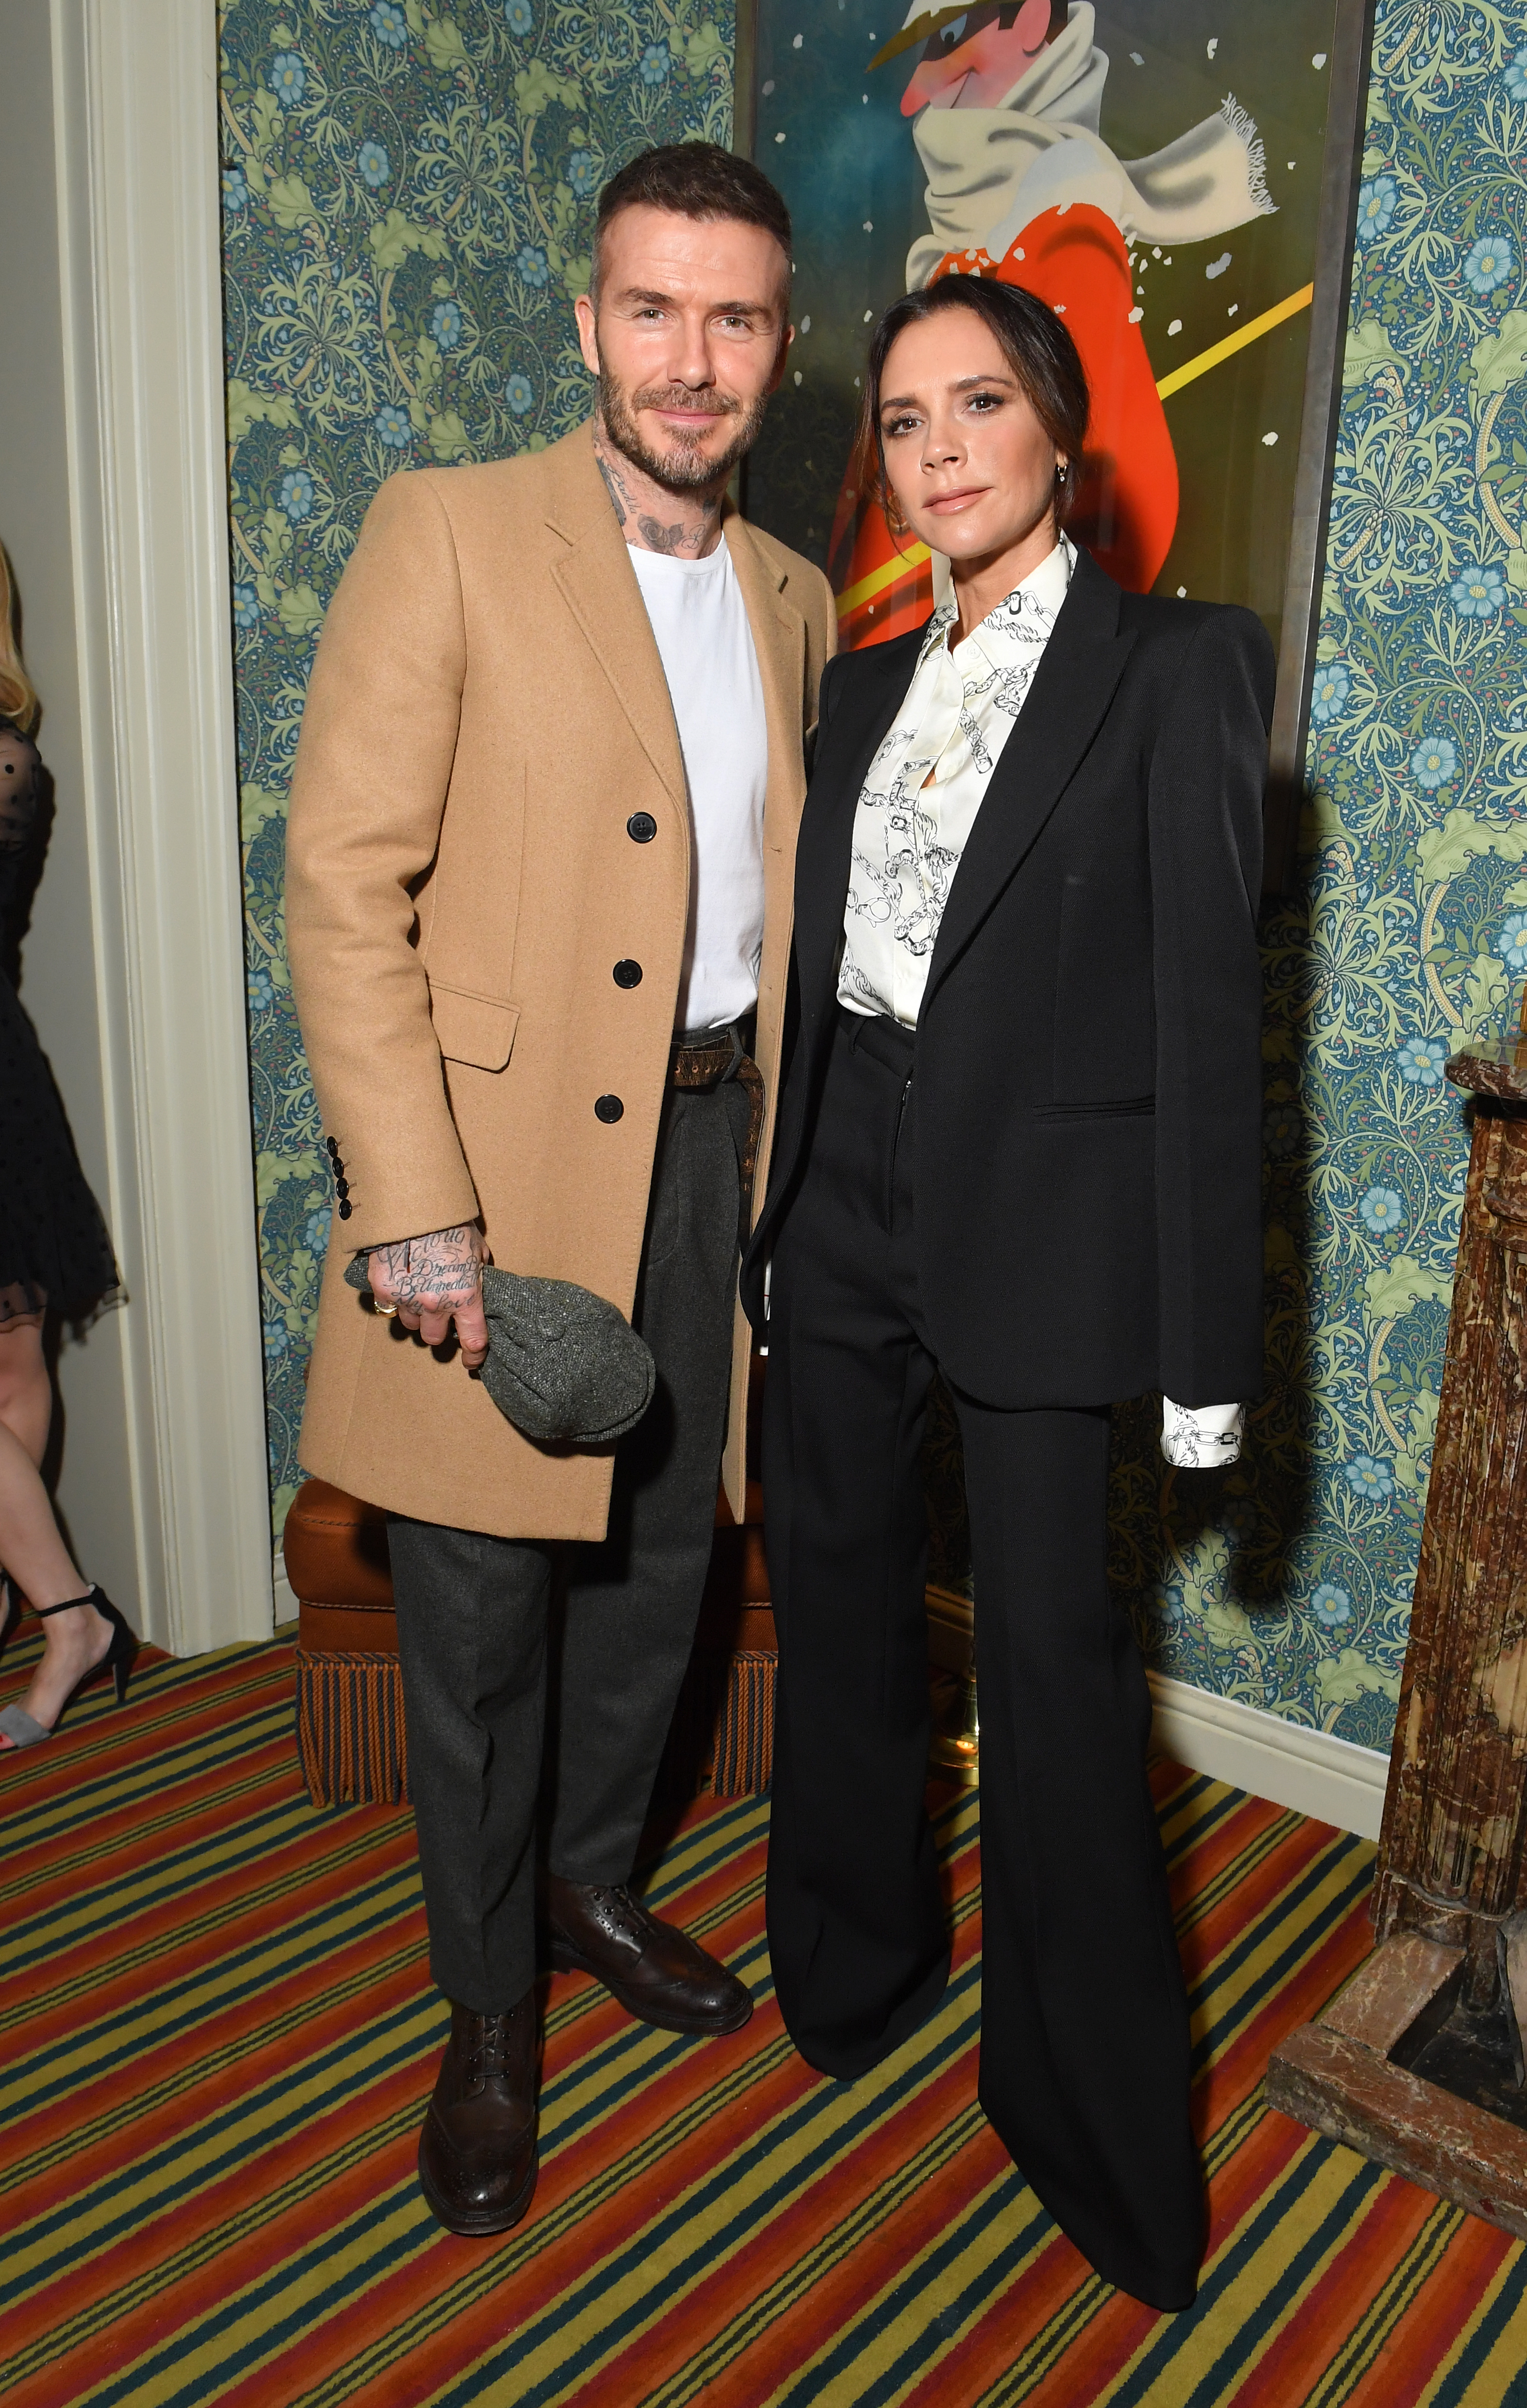 Victoria and David Beckham attend the Victoria Beckham x YouTube Fashion & Beauty After Party at London Fashion Week hosted by Derek Blasberg and David Beckham, at Marks Club on February 17, 2019 in London, England. | Source: Getty Images